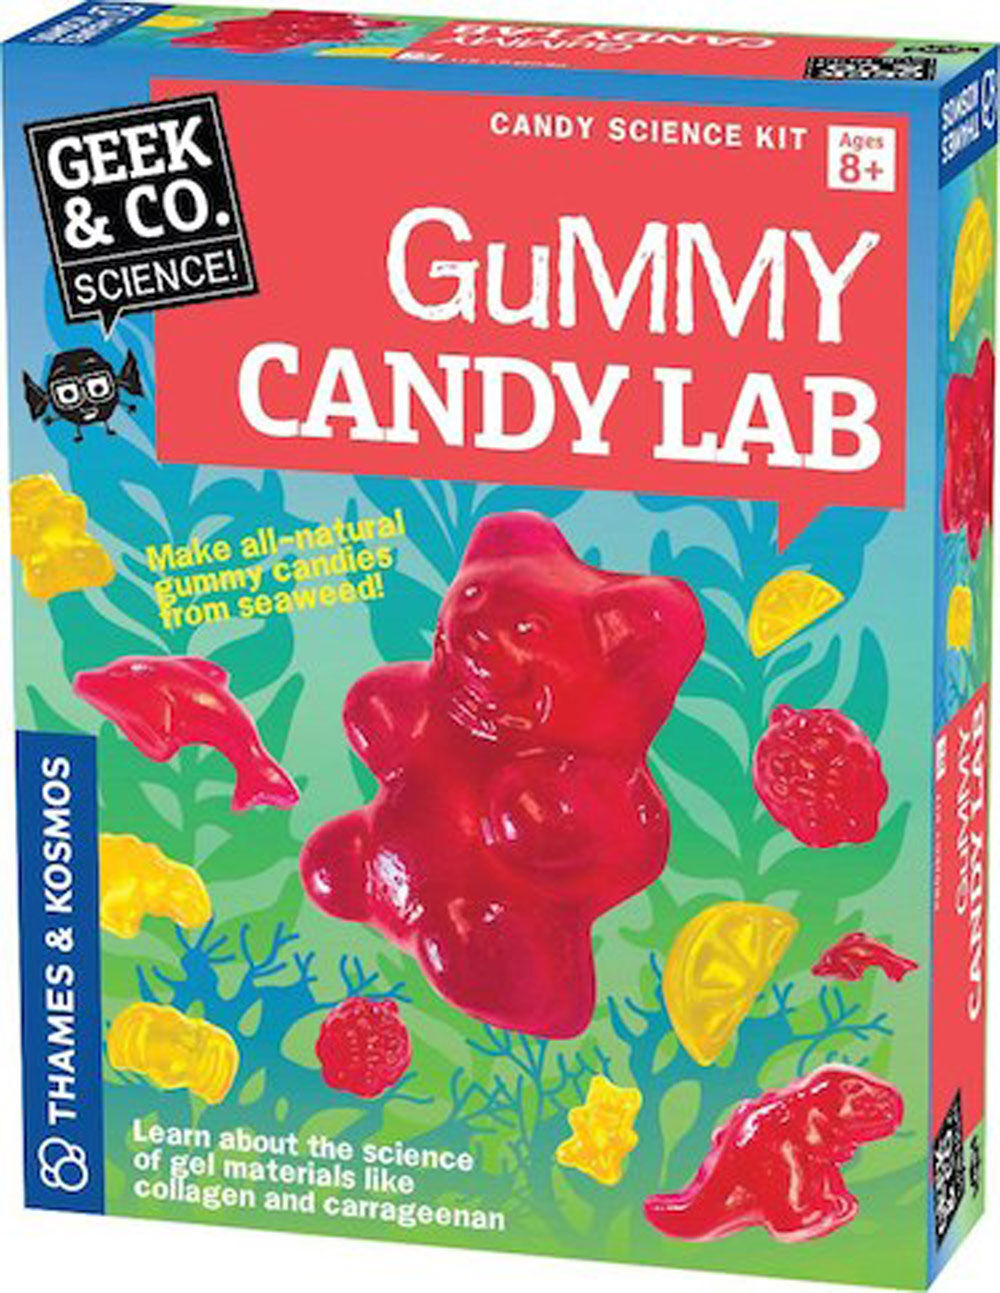 Thames & Kosmos 550024 Gummy Candy Lab Science Kit B4 for sale online 